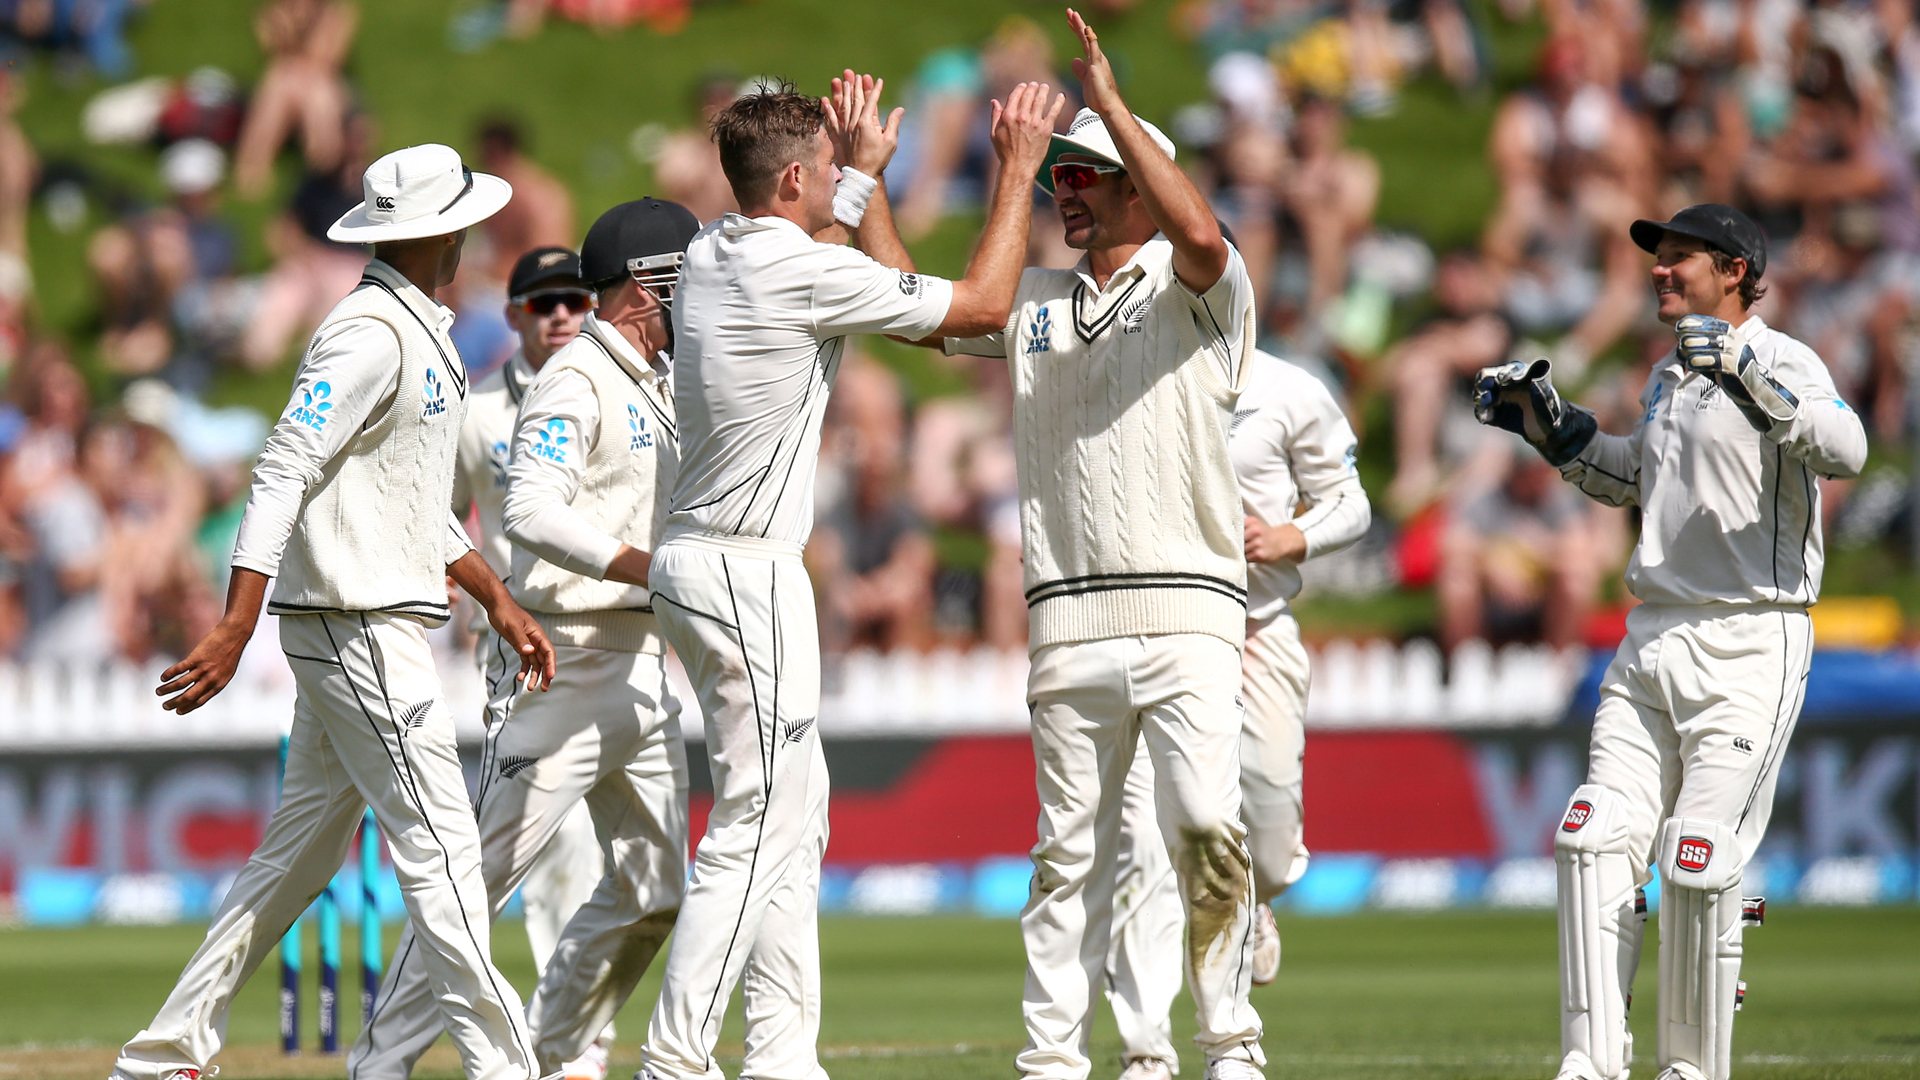 Tim Southee starred in what was an even start to New Zealand's first Test against Sri Lanka.